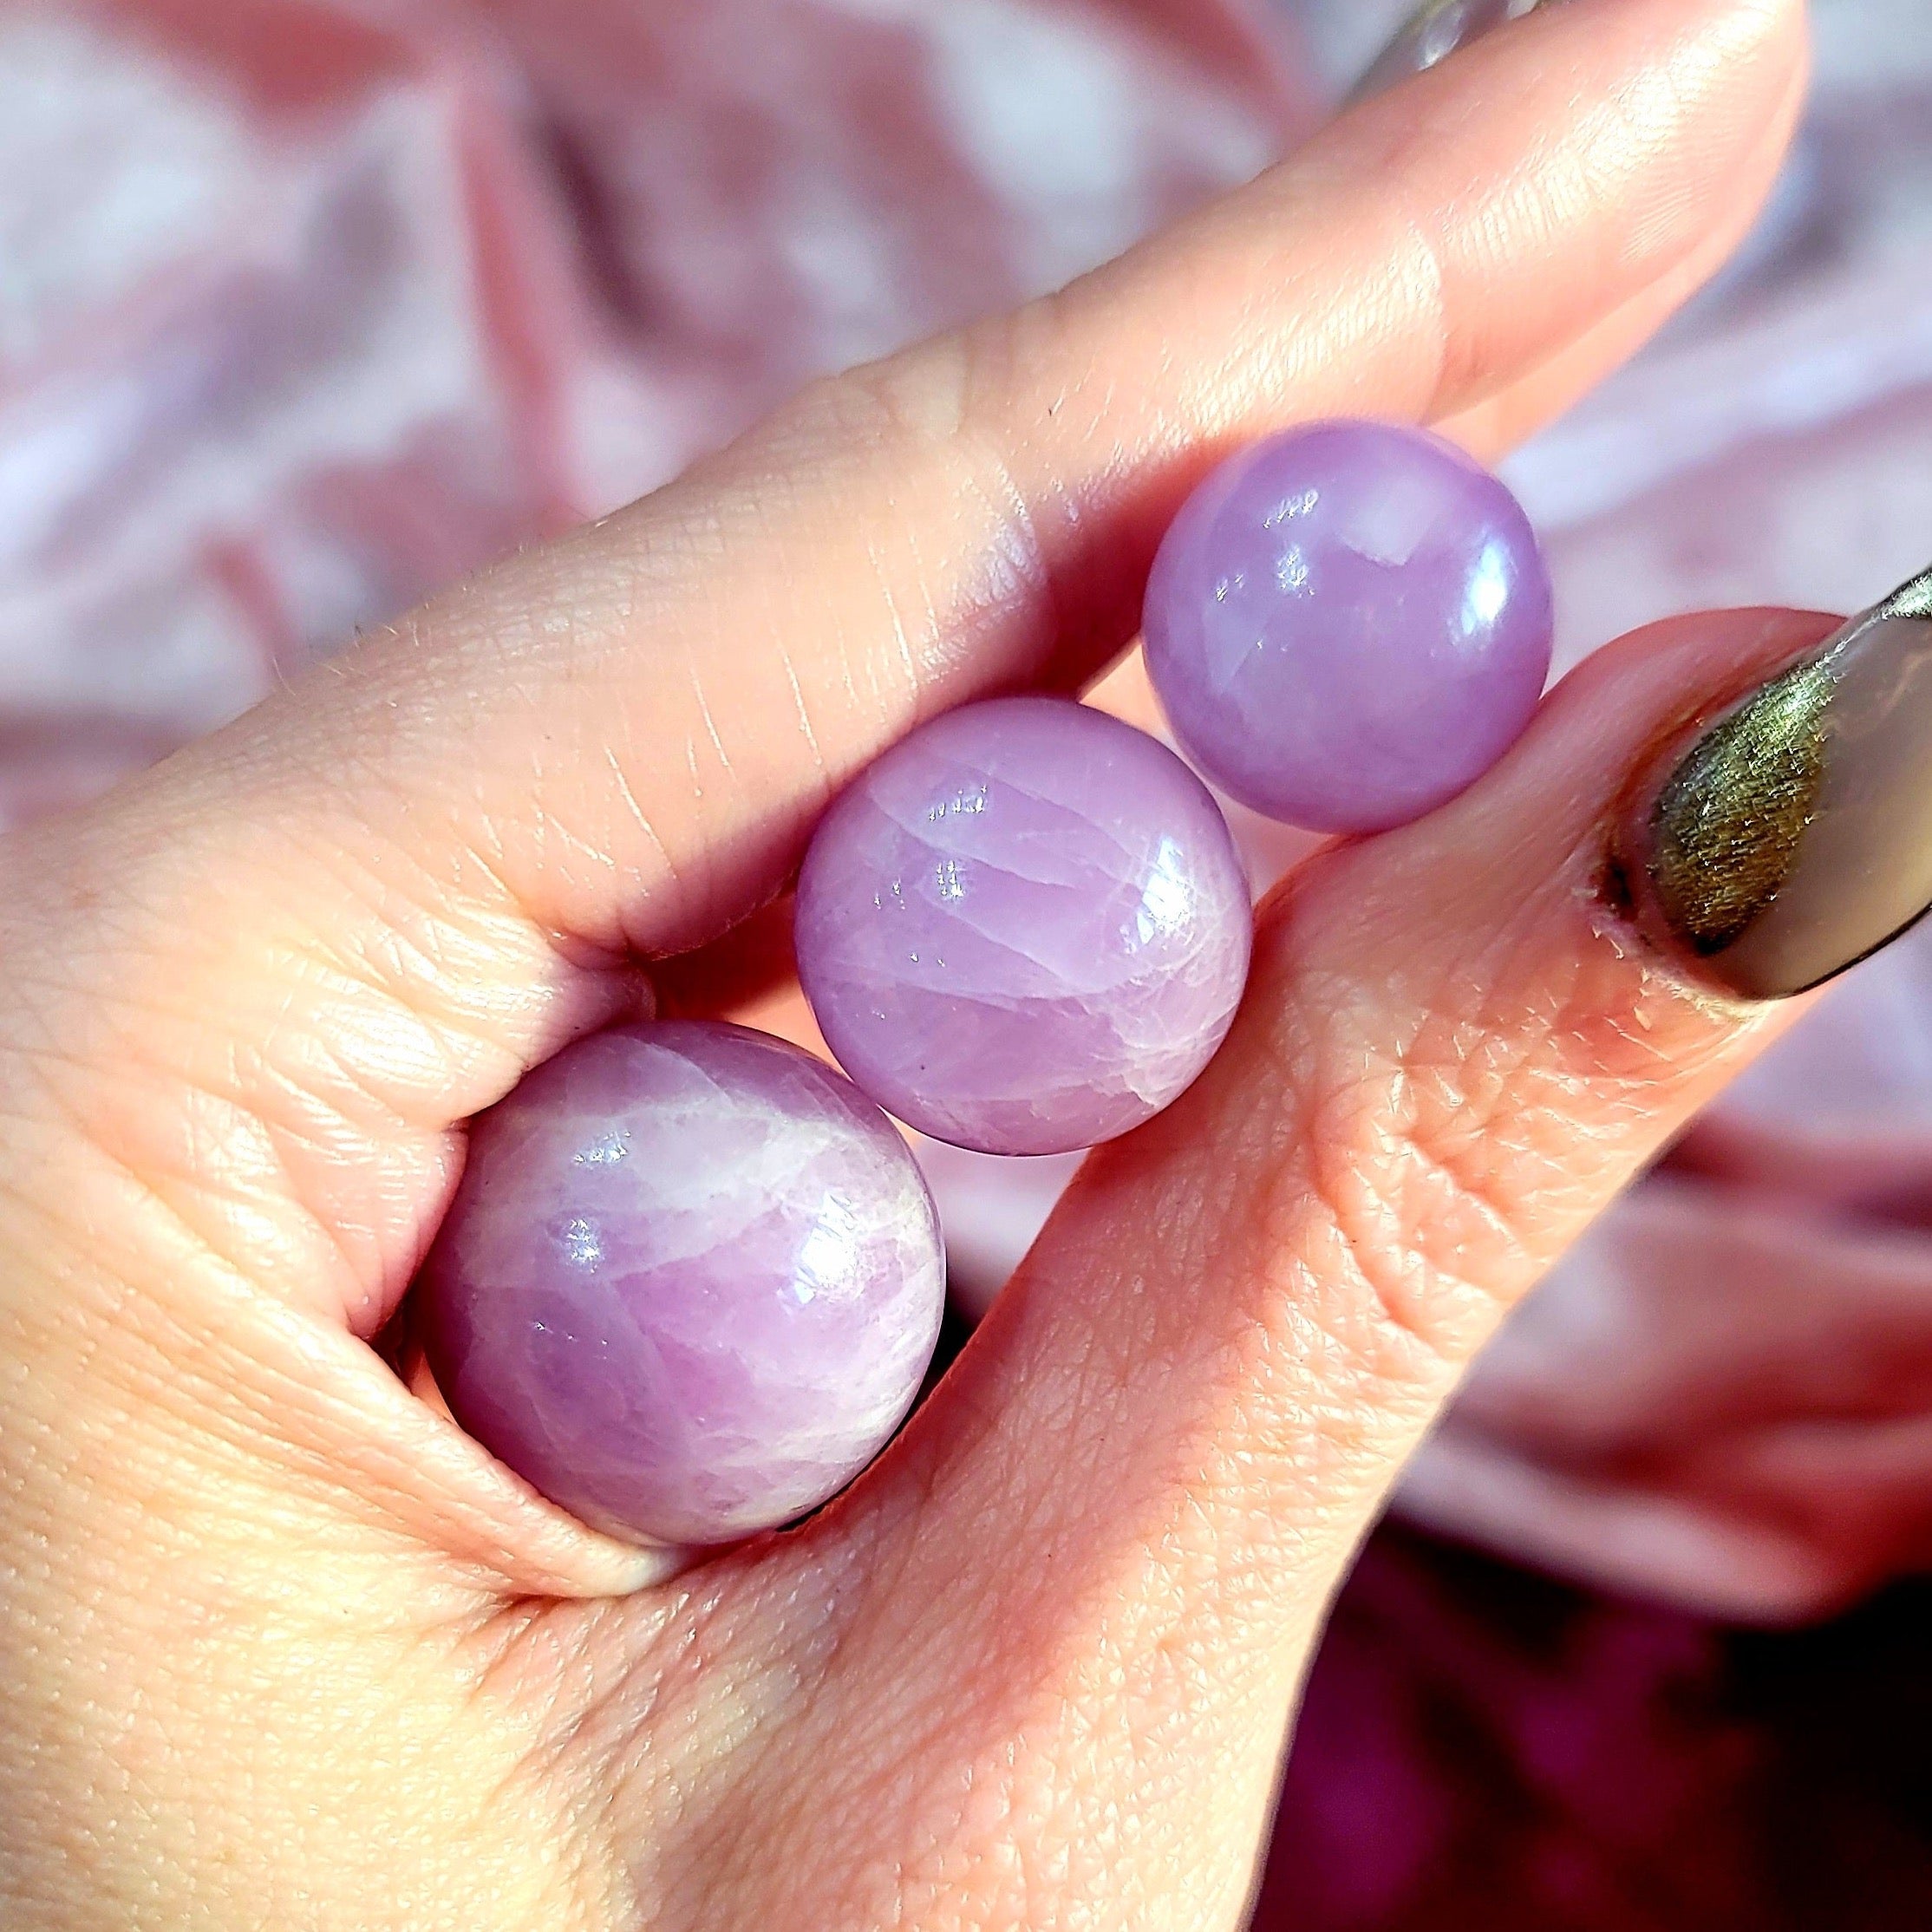 Kunzite Mini Sphere for Emotional, Family Healing and Opening Your Heart to Love